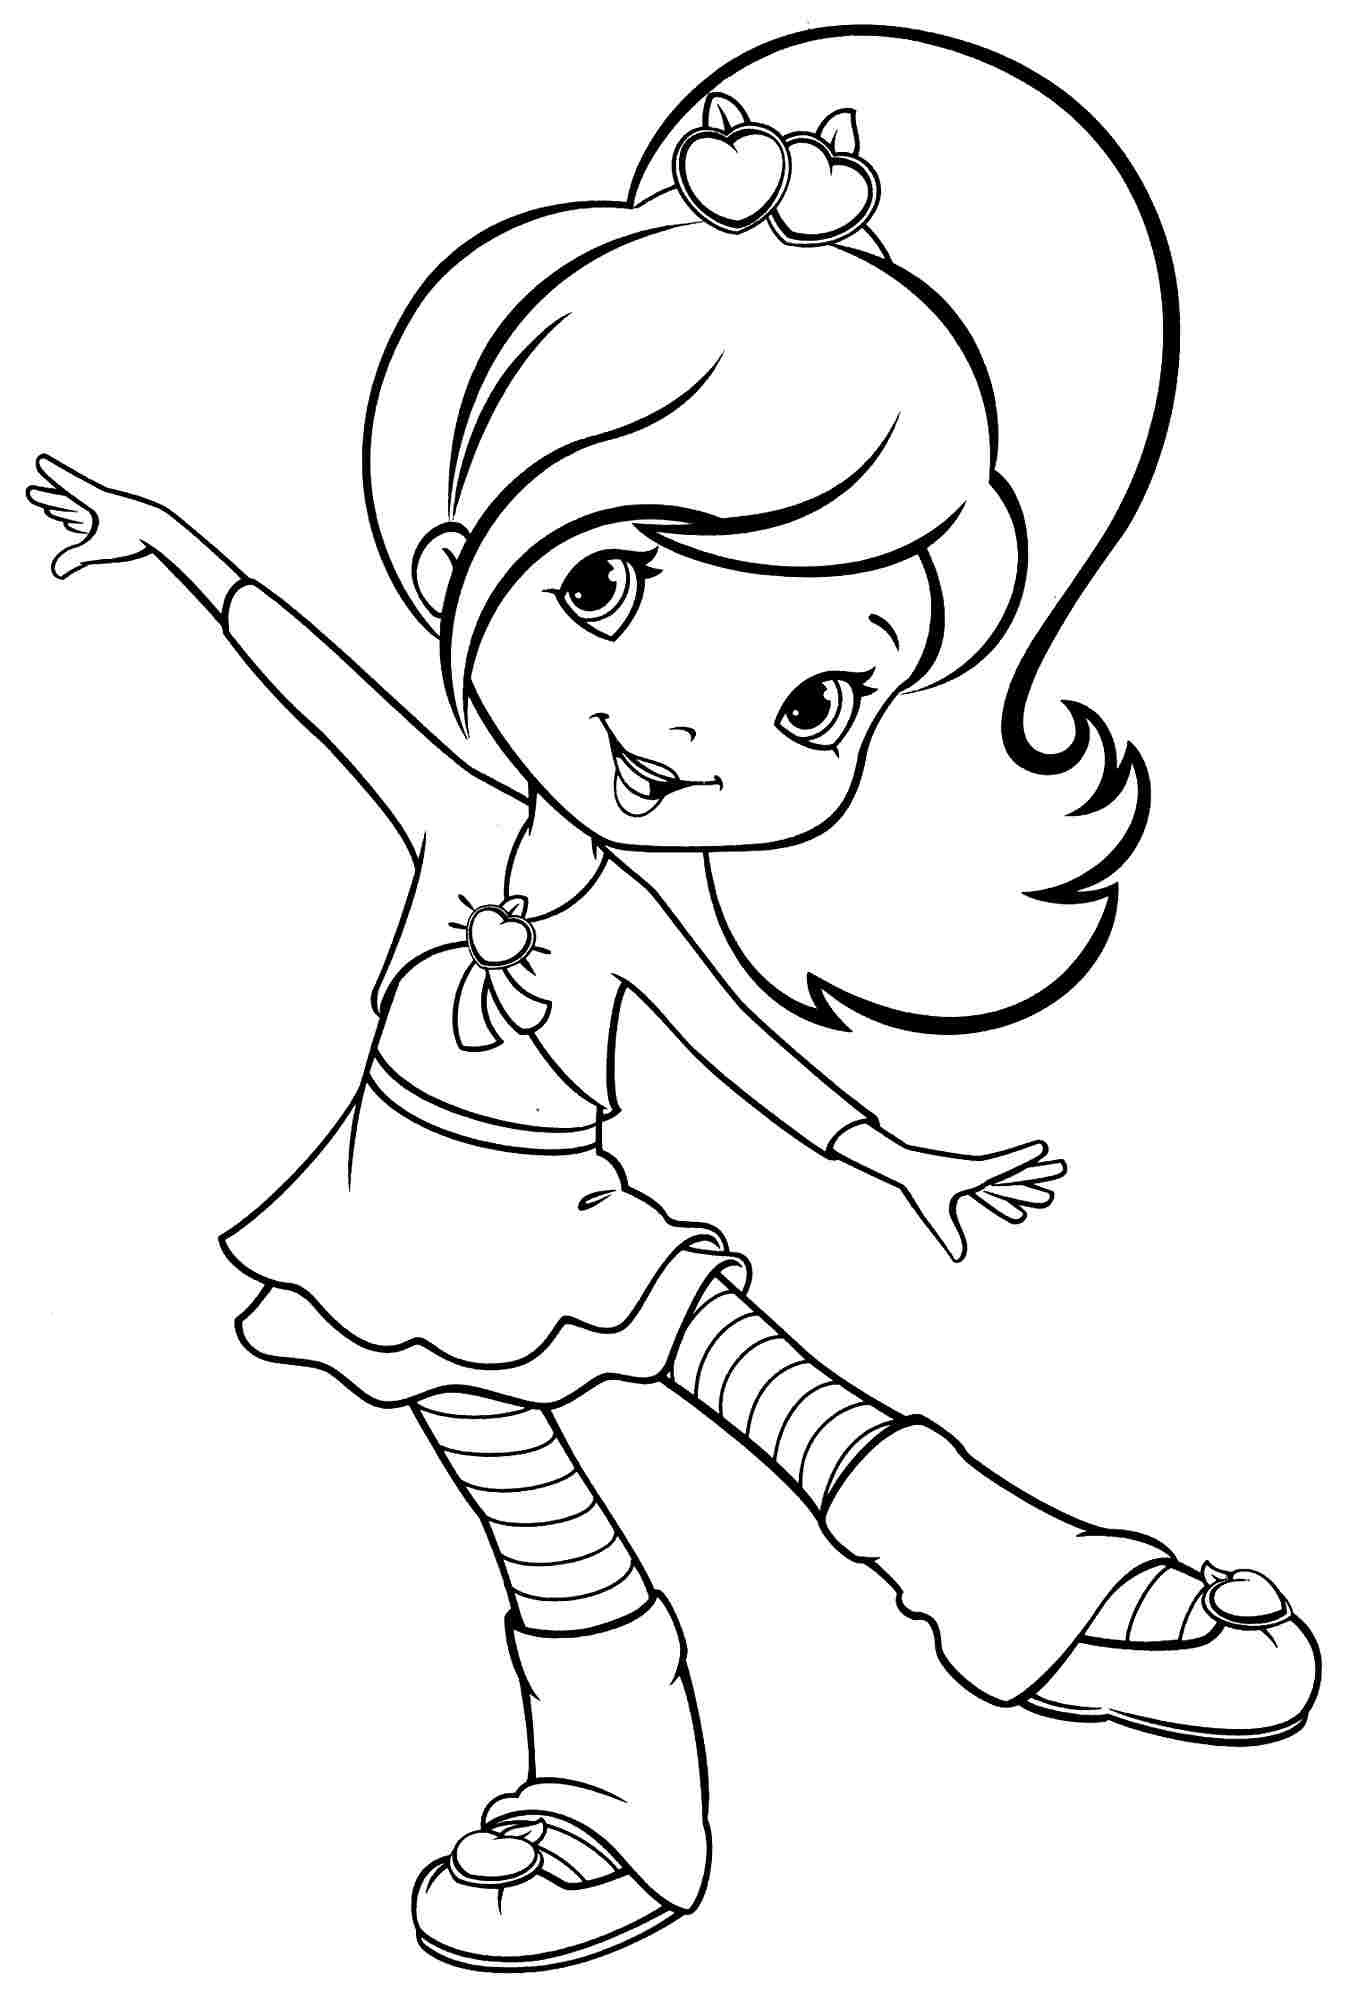 Printable Coloring Pages For Girls
 Coloring Pages for Girls Best Coloring Pages For Kids